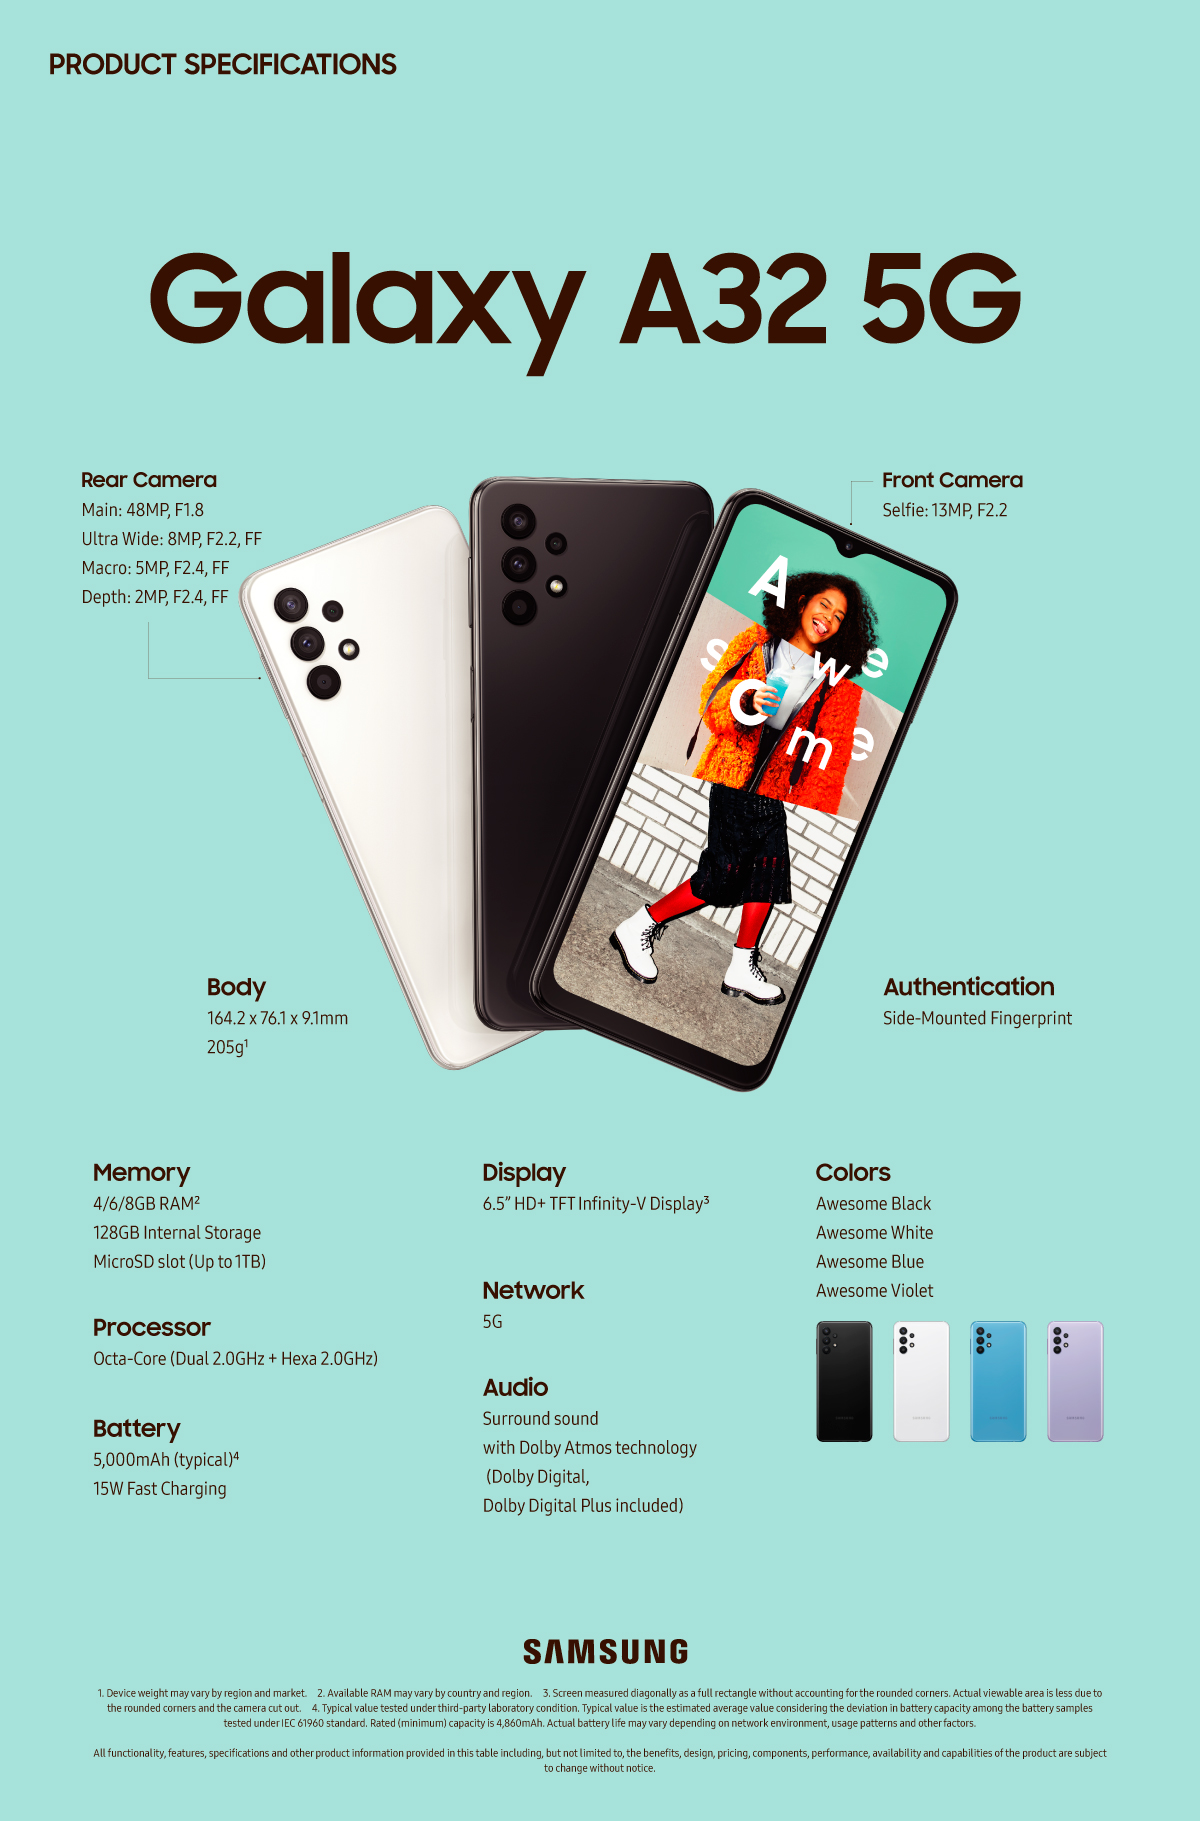 Specs] Galaxy A32 5G Delivers Awesome Power in an Iconic Design ...